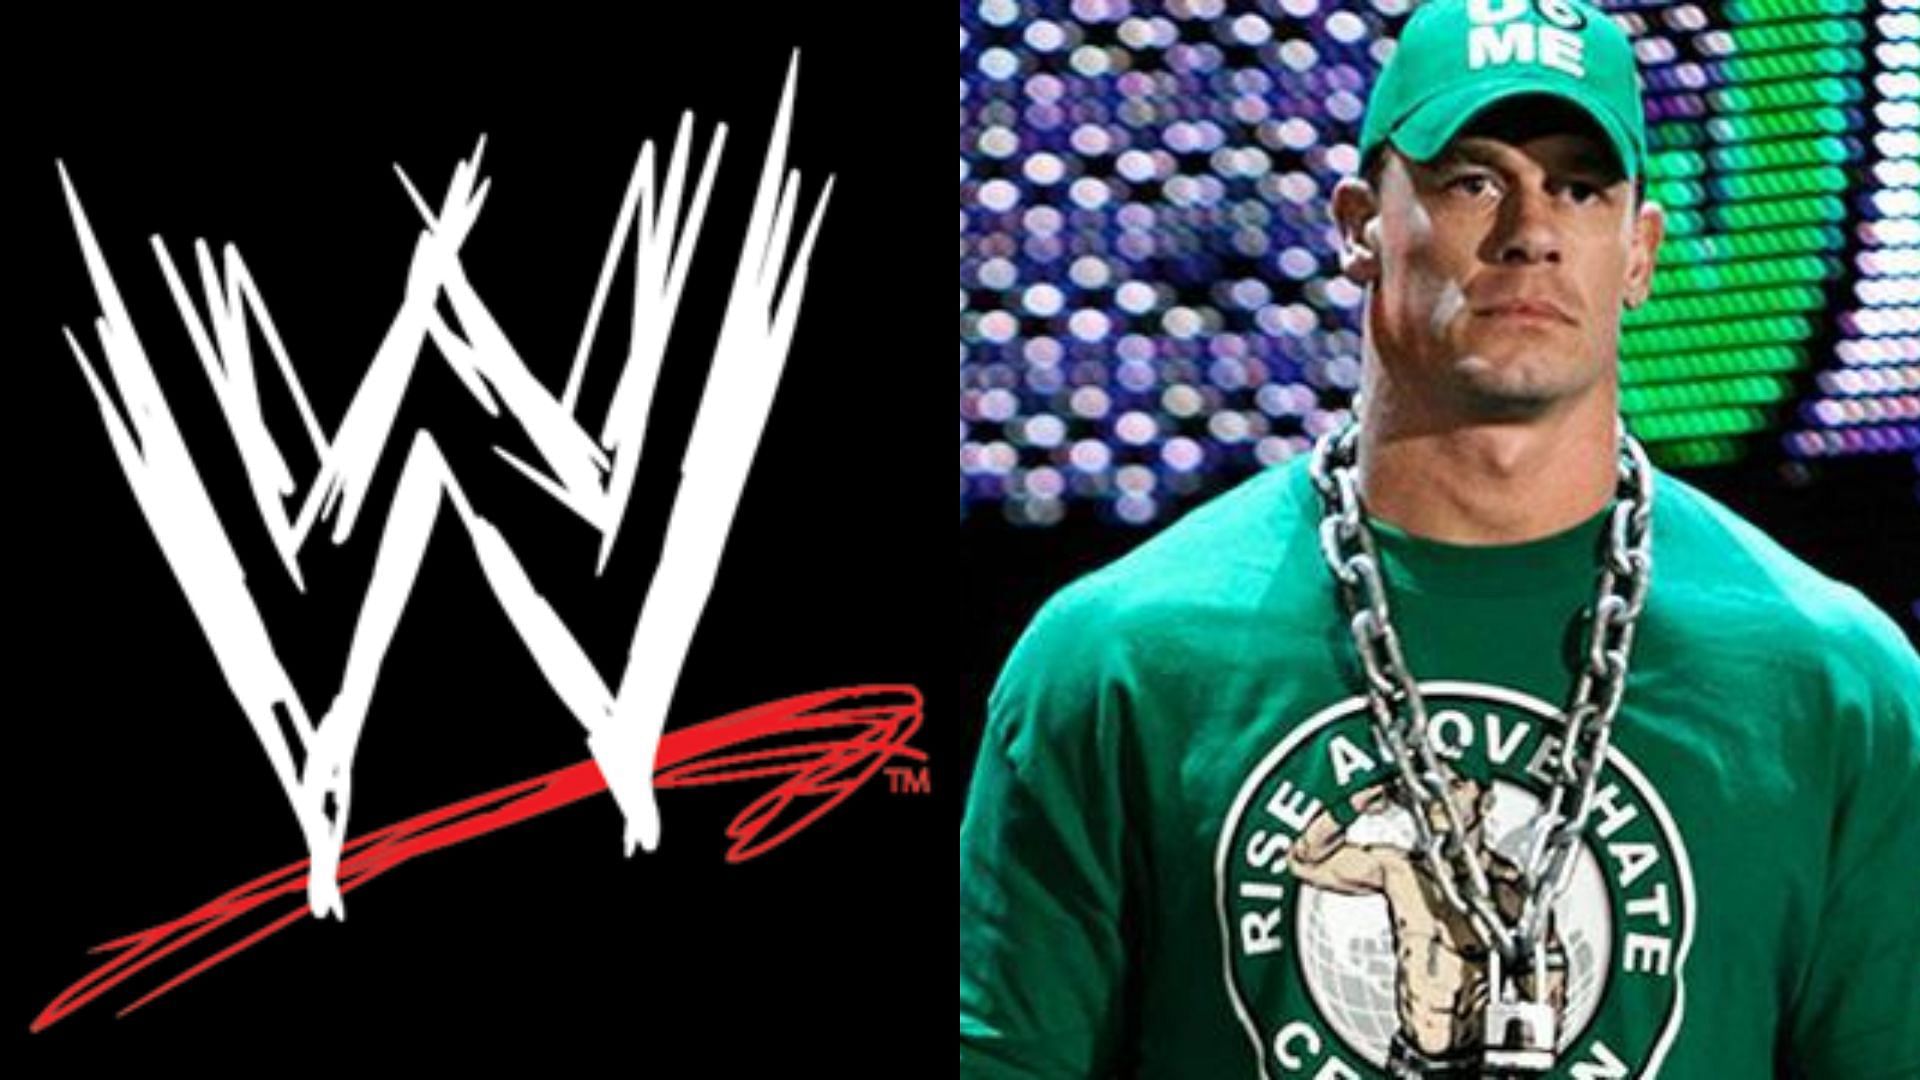 The former WWE star recalled working with John Cena